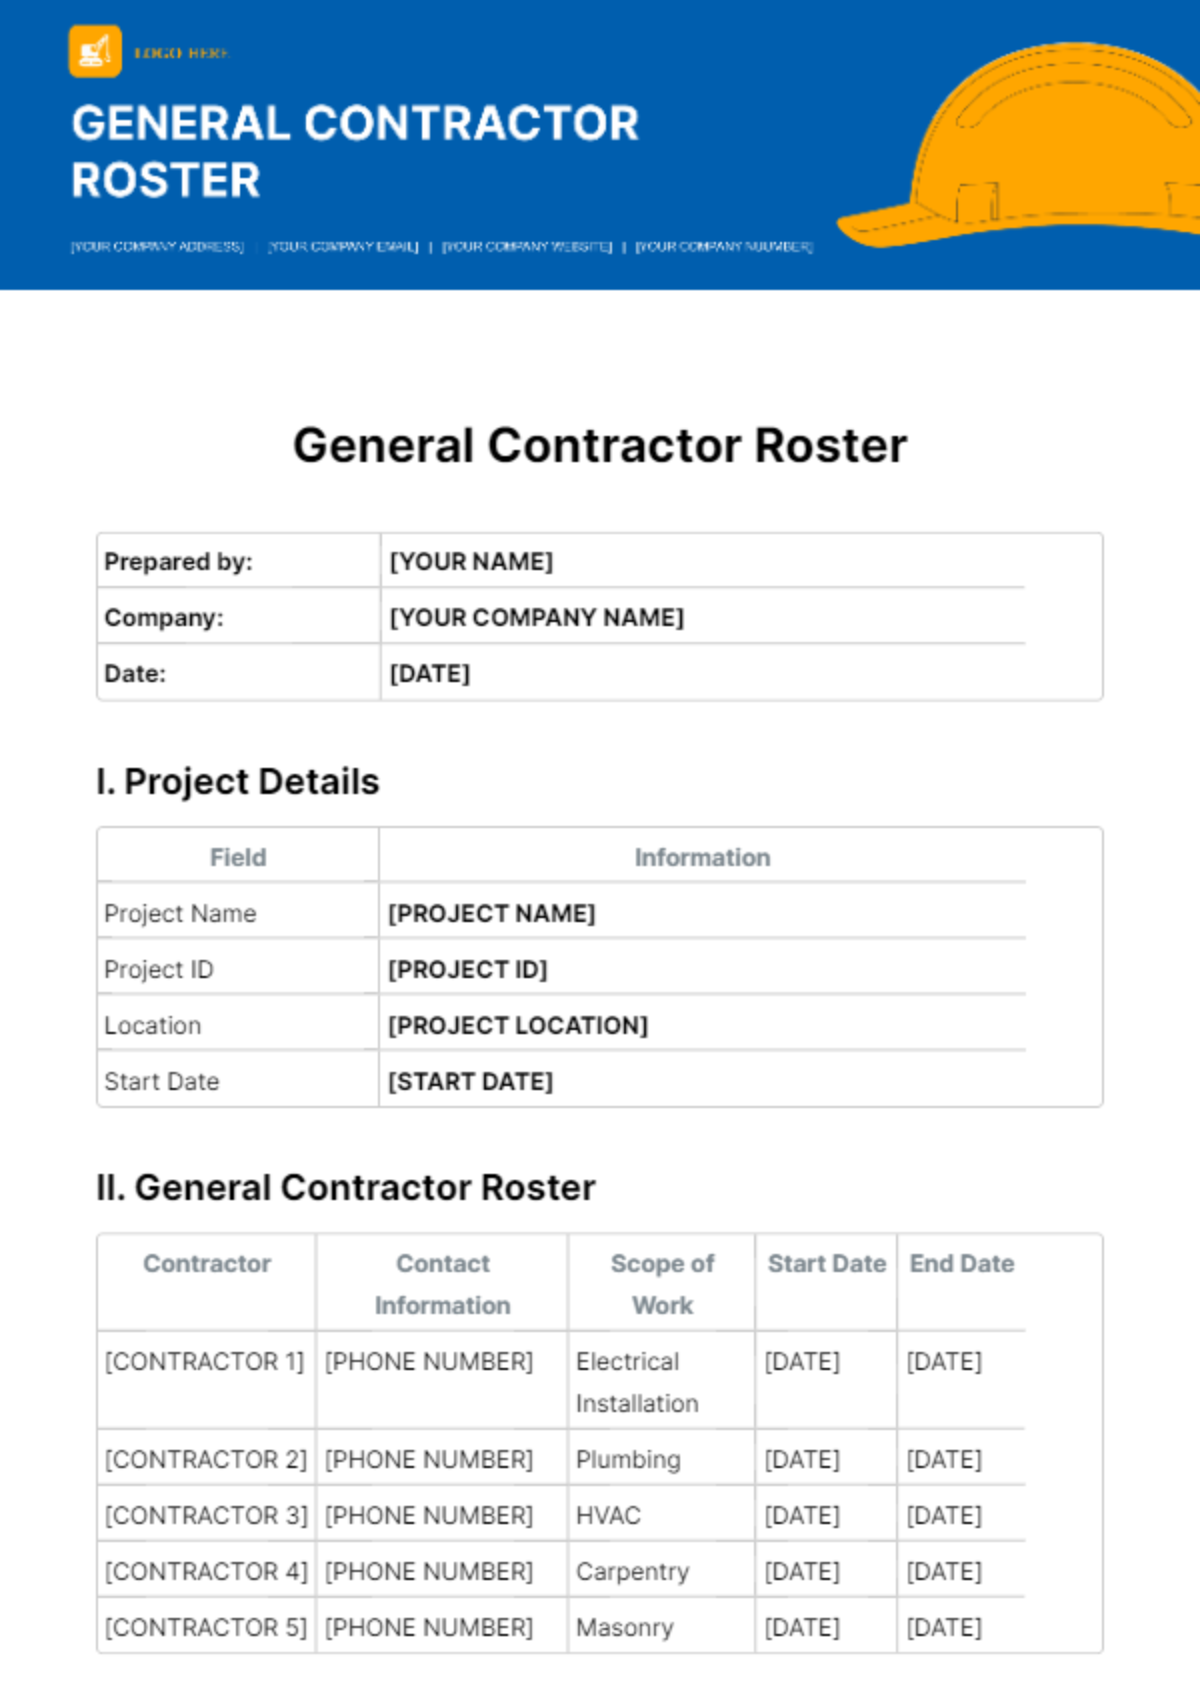 General Contractor Roster Template